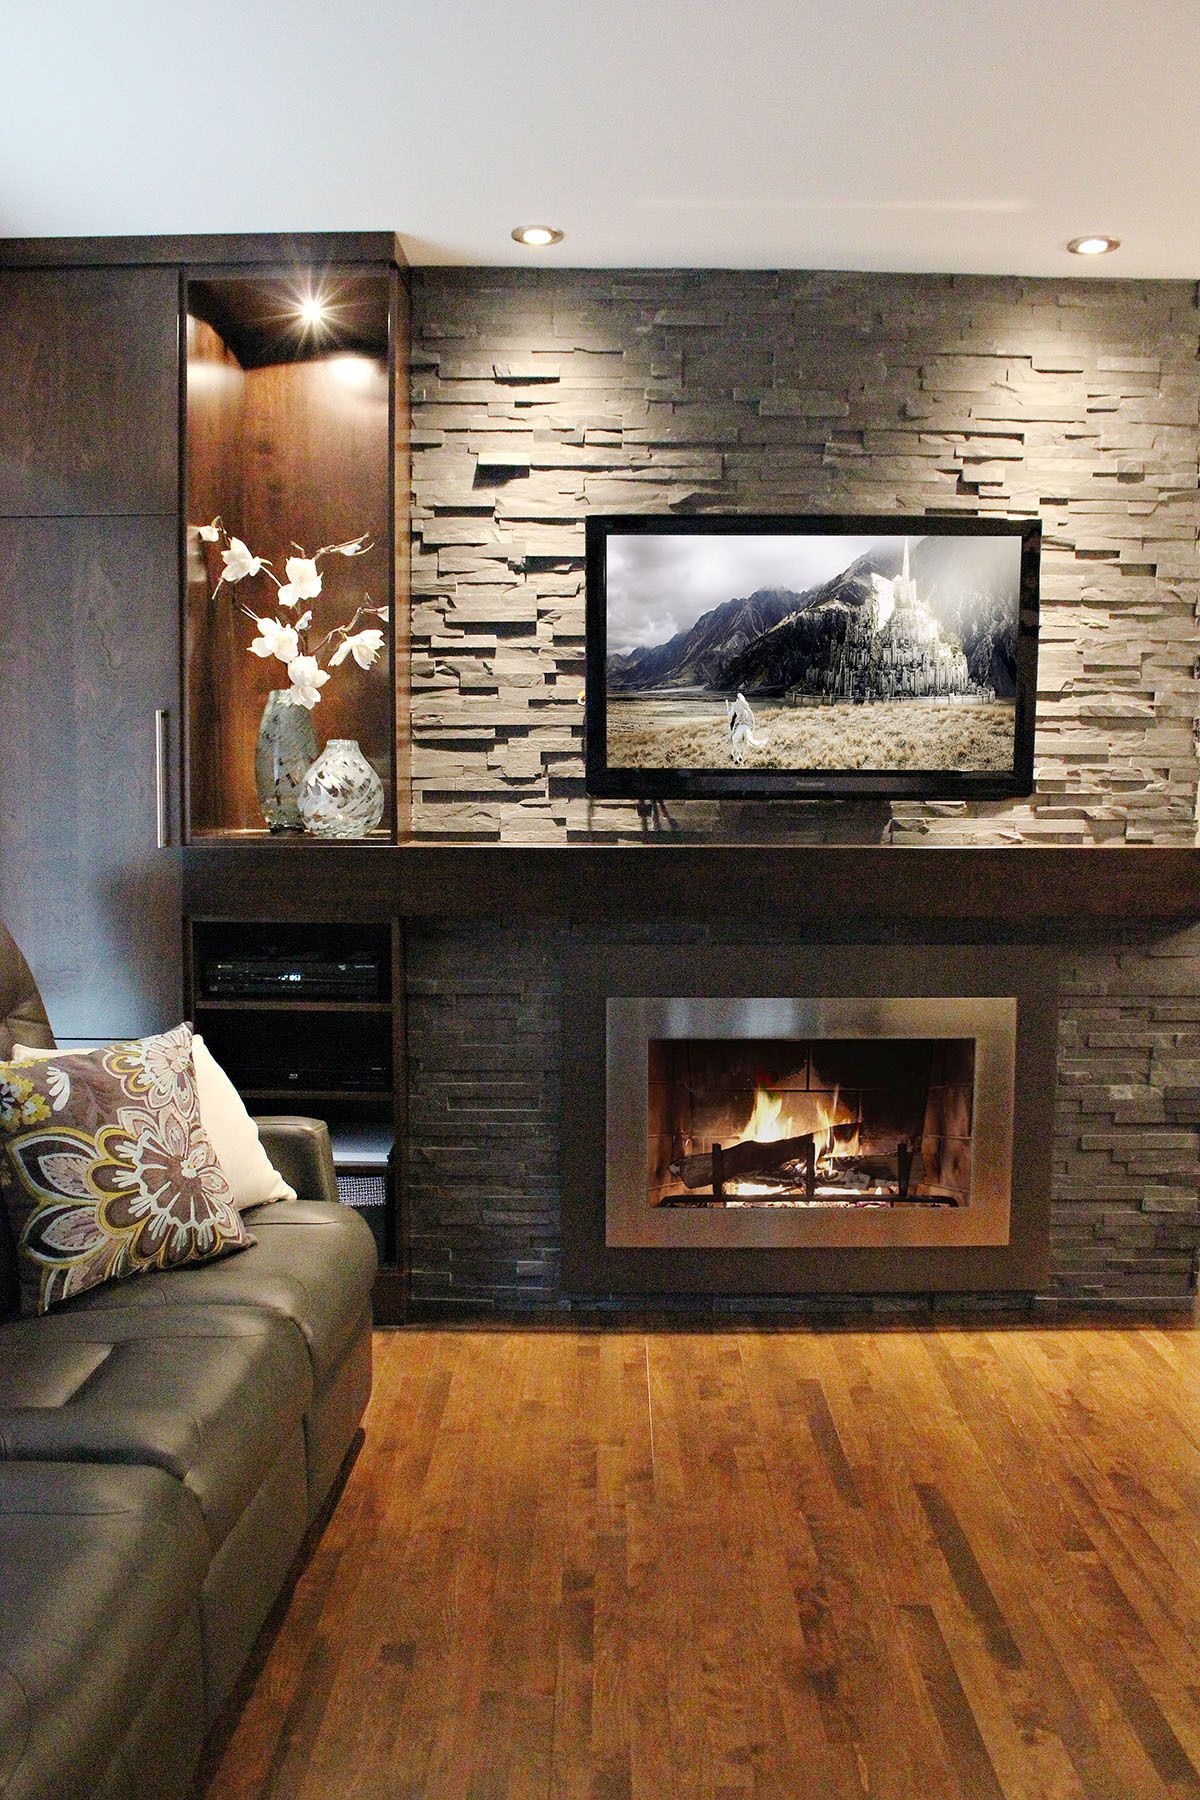 Fireplace Ideas Pictures Lovely 30 Incredible Fireplace Ideas for Your Best Home Design